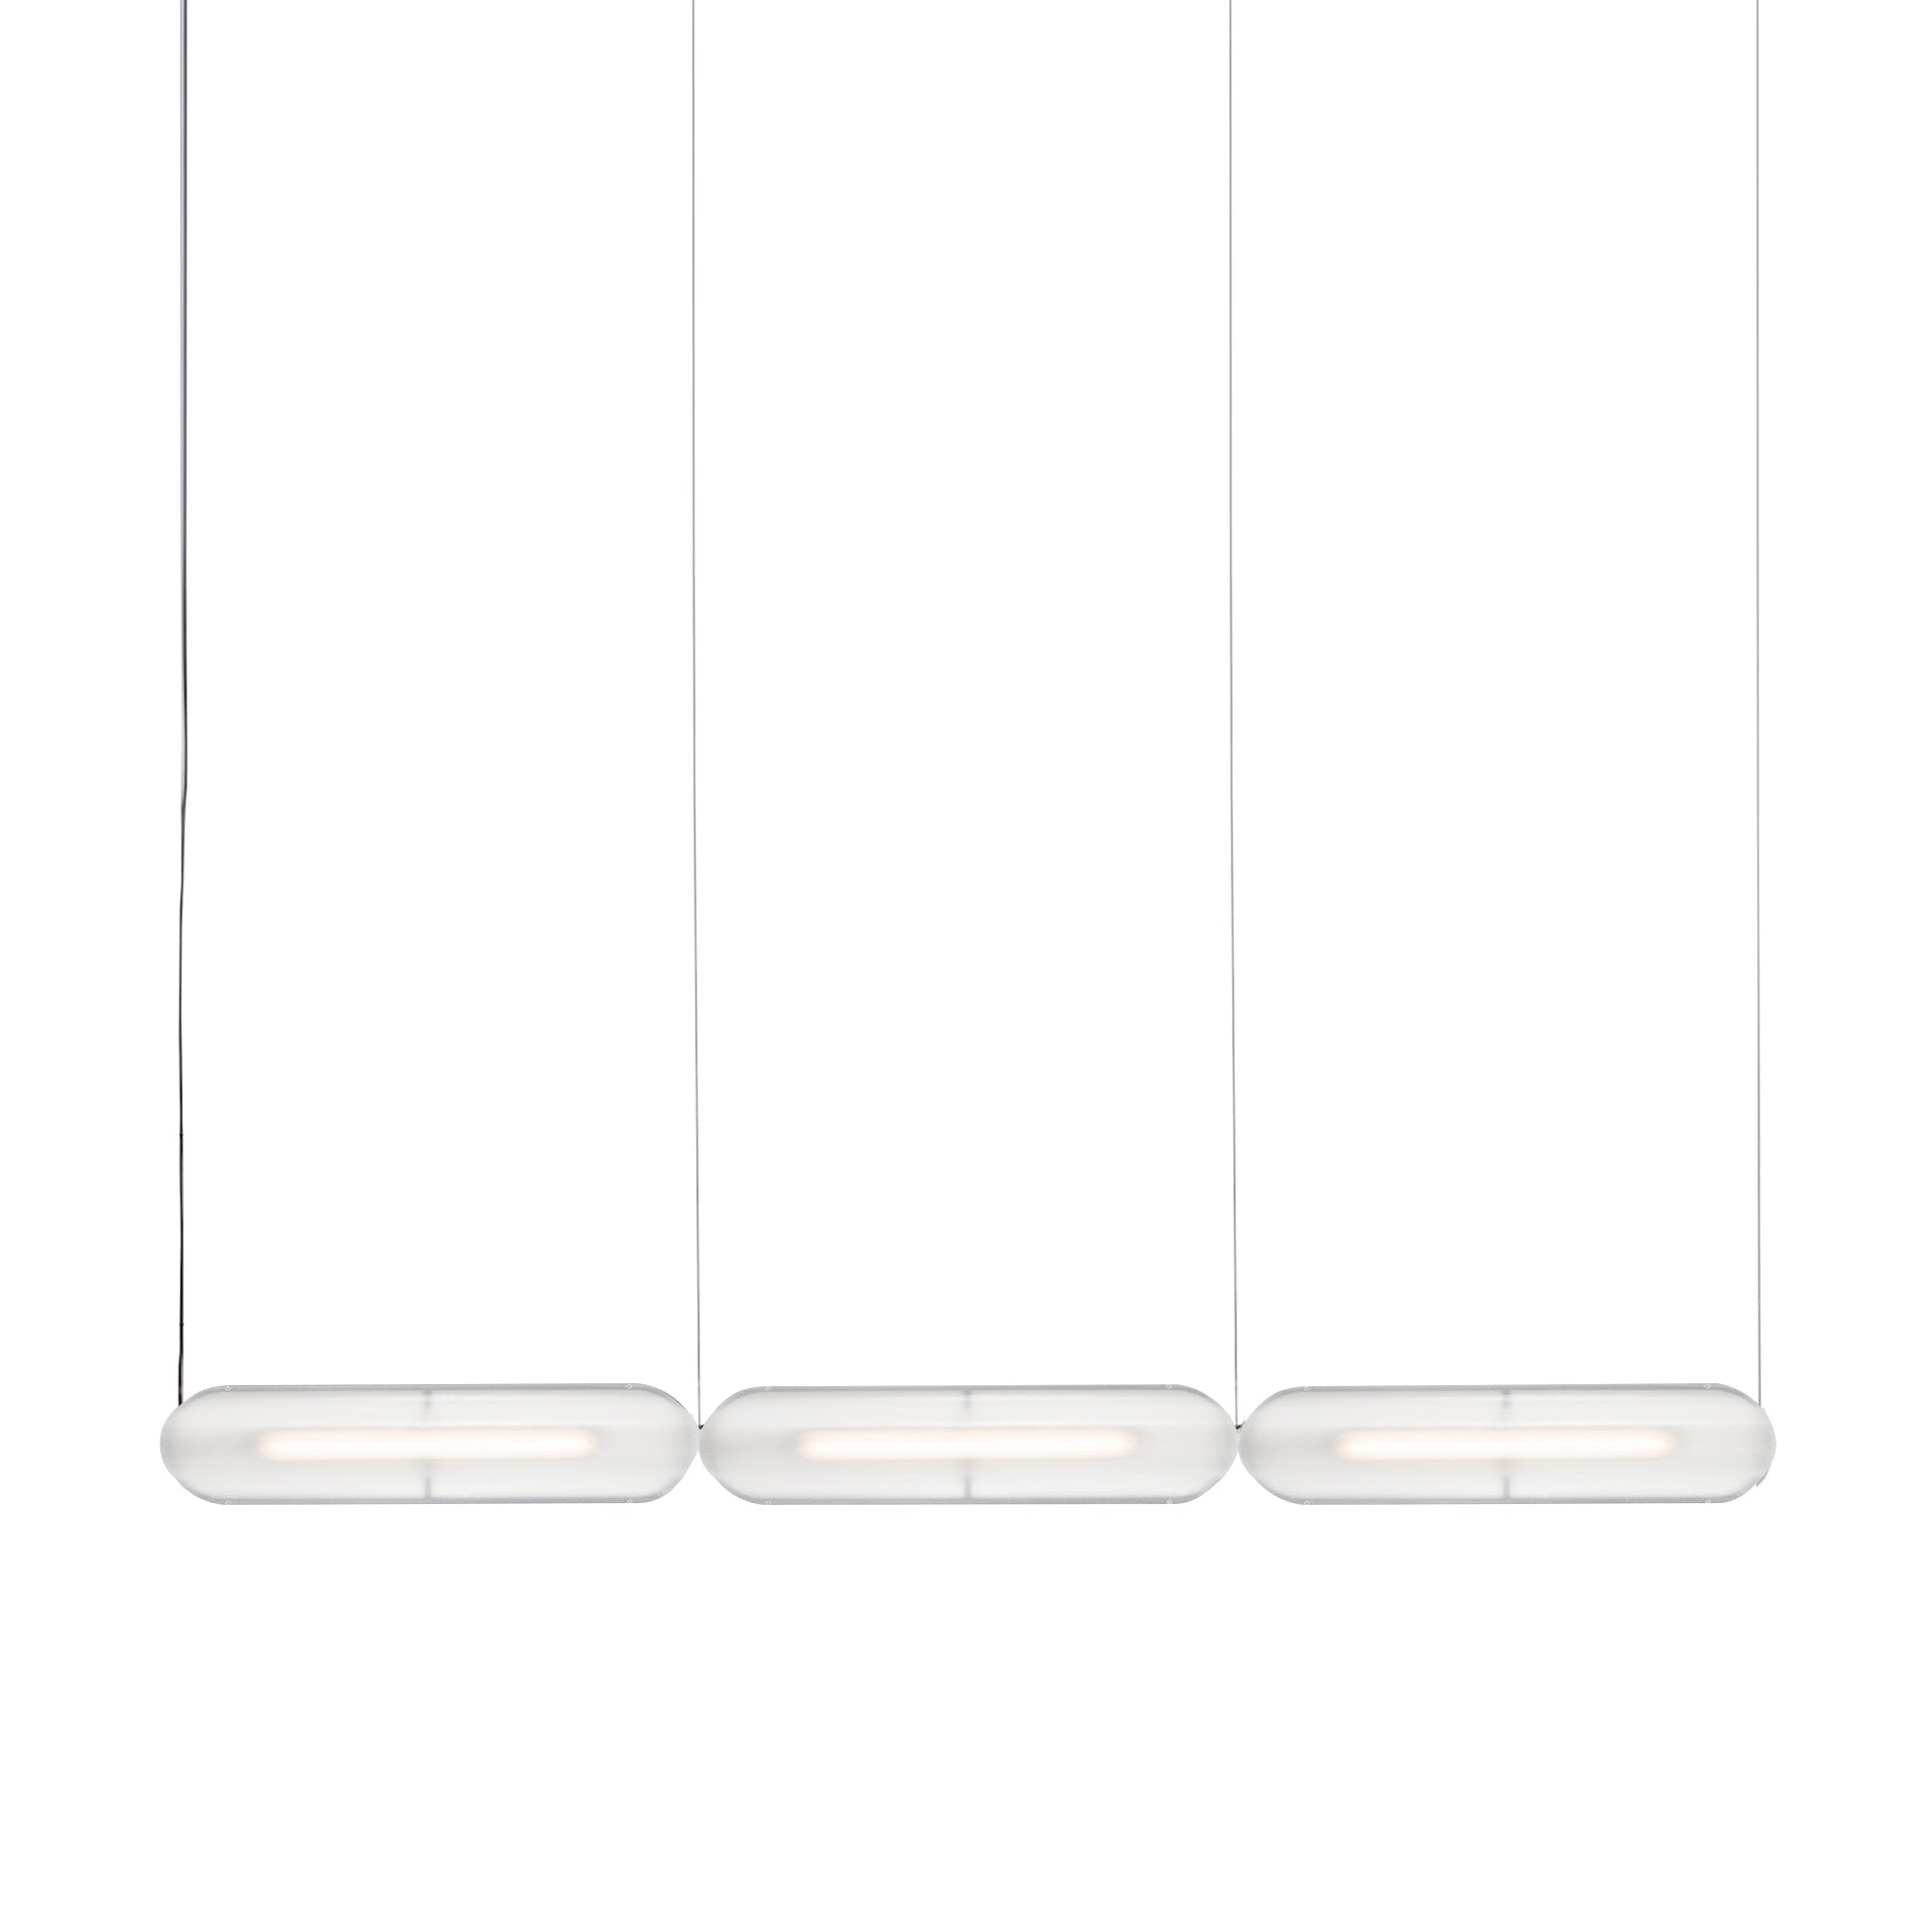 Vale System Y-Axis Pendant Light: Horizontal + End-to-End: Vale 3